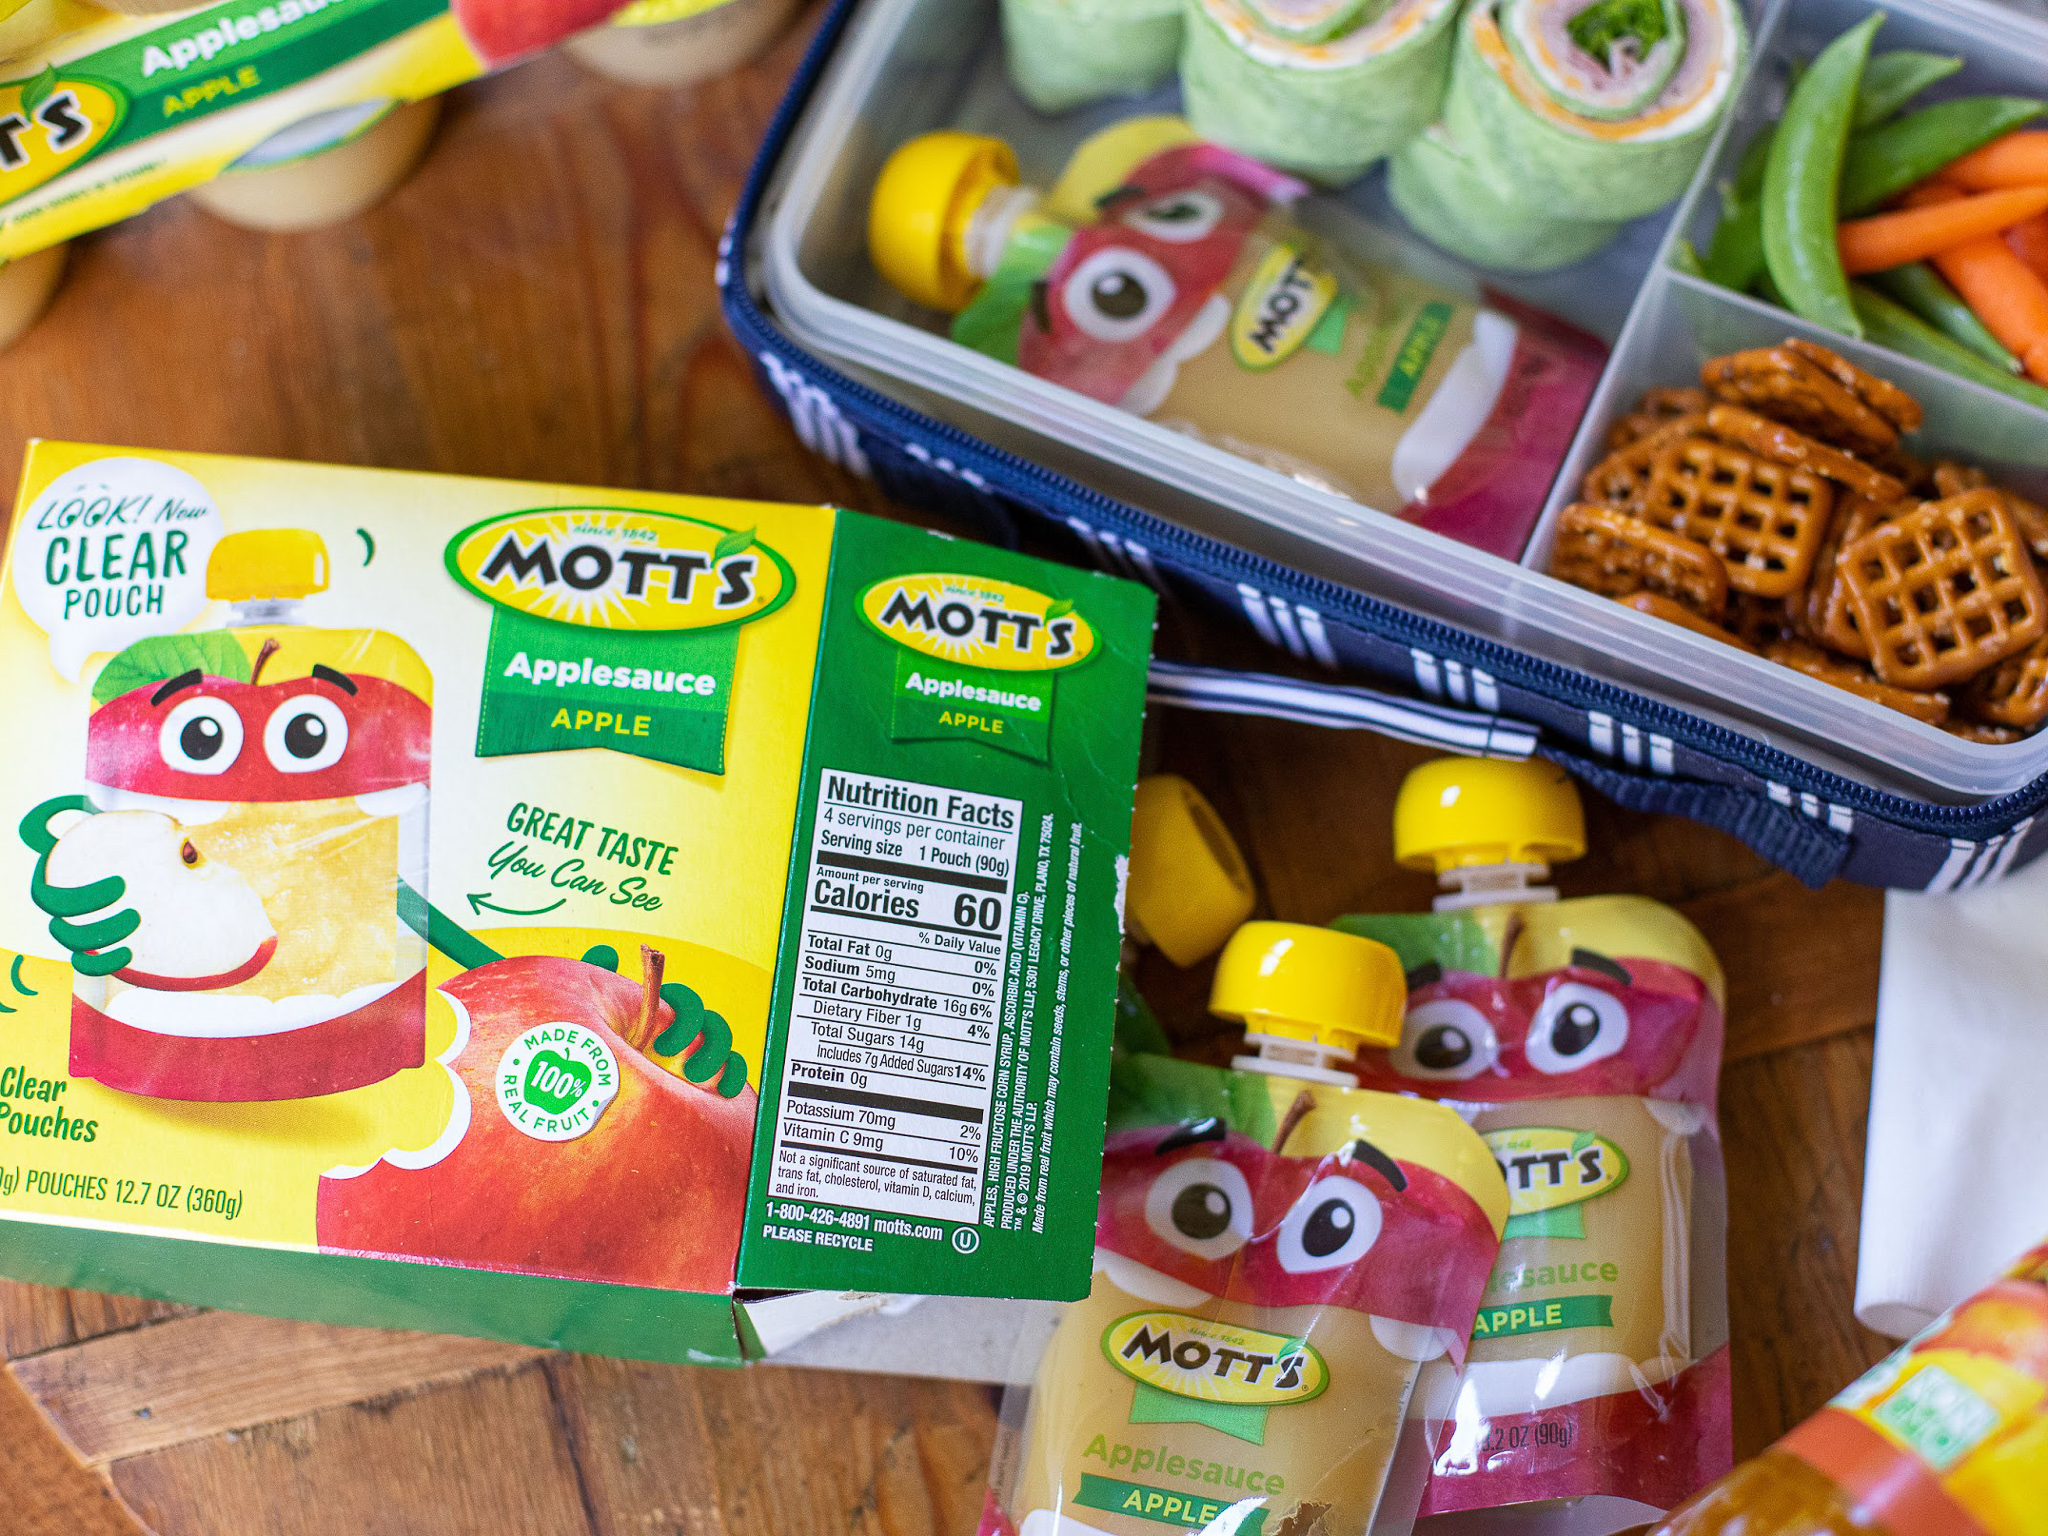 Delicious Mott's Applesauce And Juice On Sale 3/$6 At Publix on I Heart Publix 1